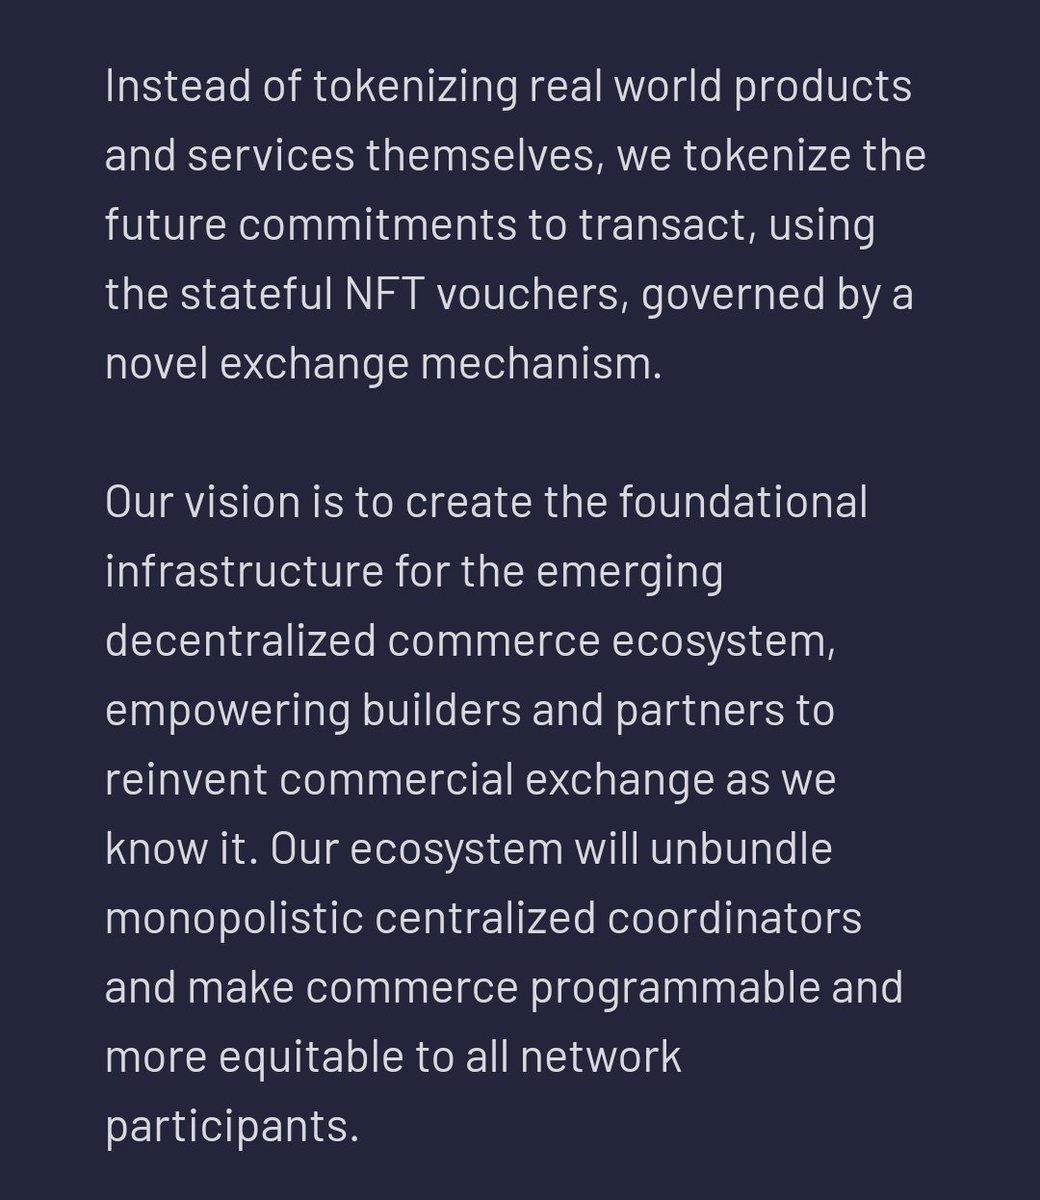 Boson Protocol's dCommerce engine solves the digital to physical redemption problem in the crypto space.Boson can enable a token to cross the digital divide into real world products and services, via a stateful NFT. $BOSON